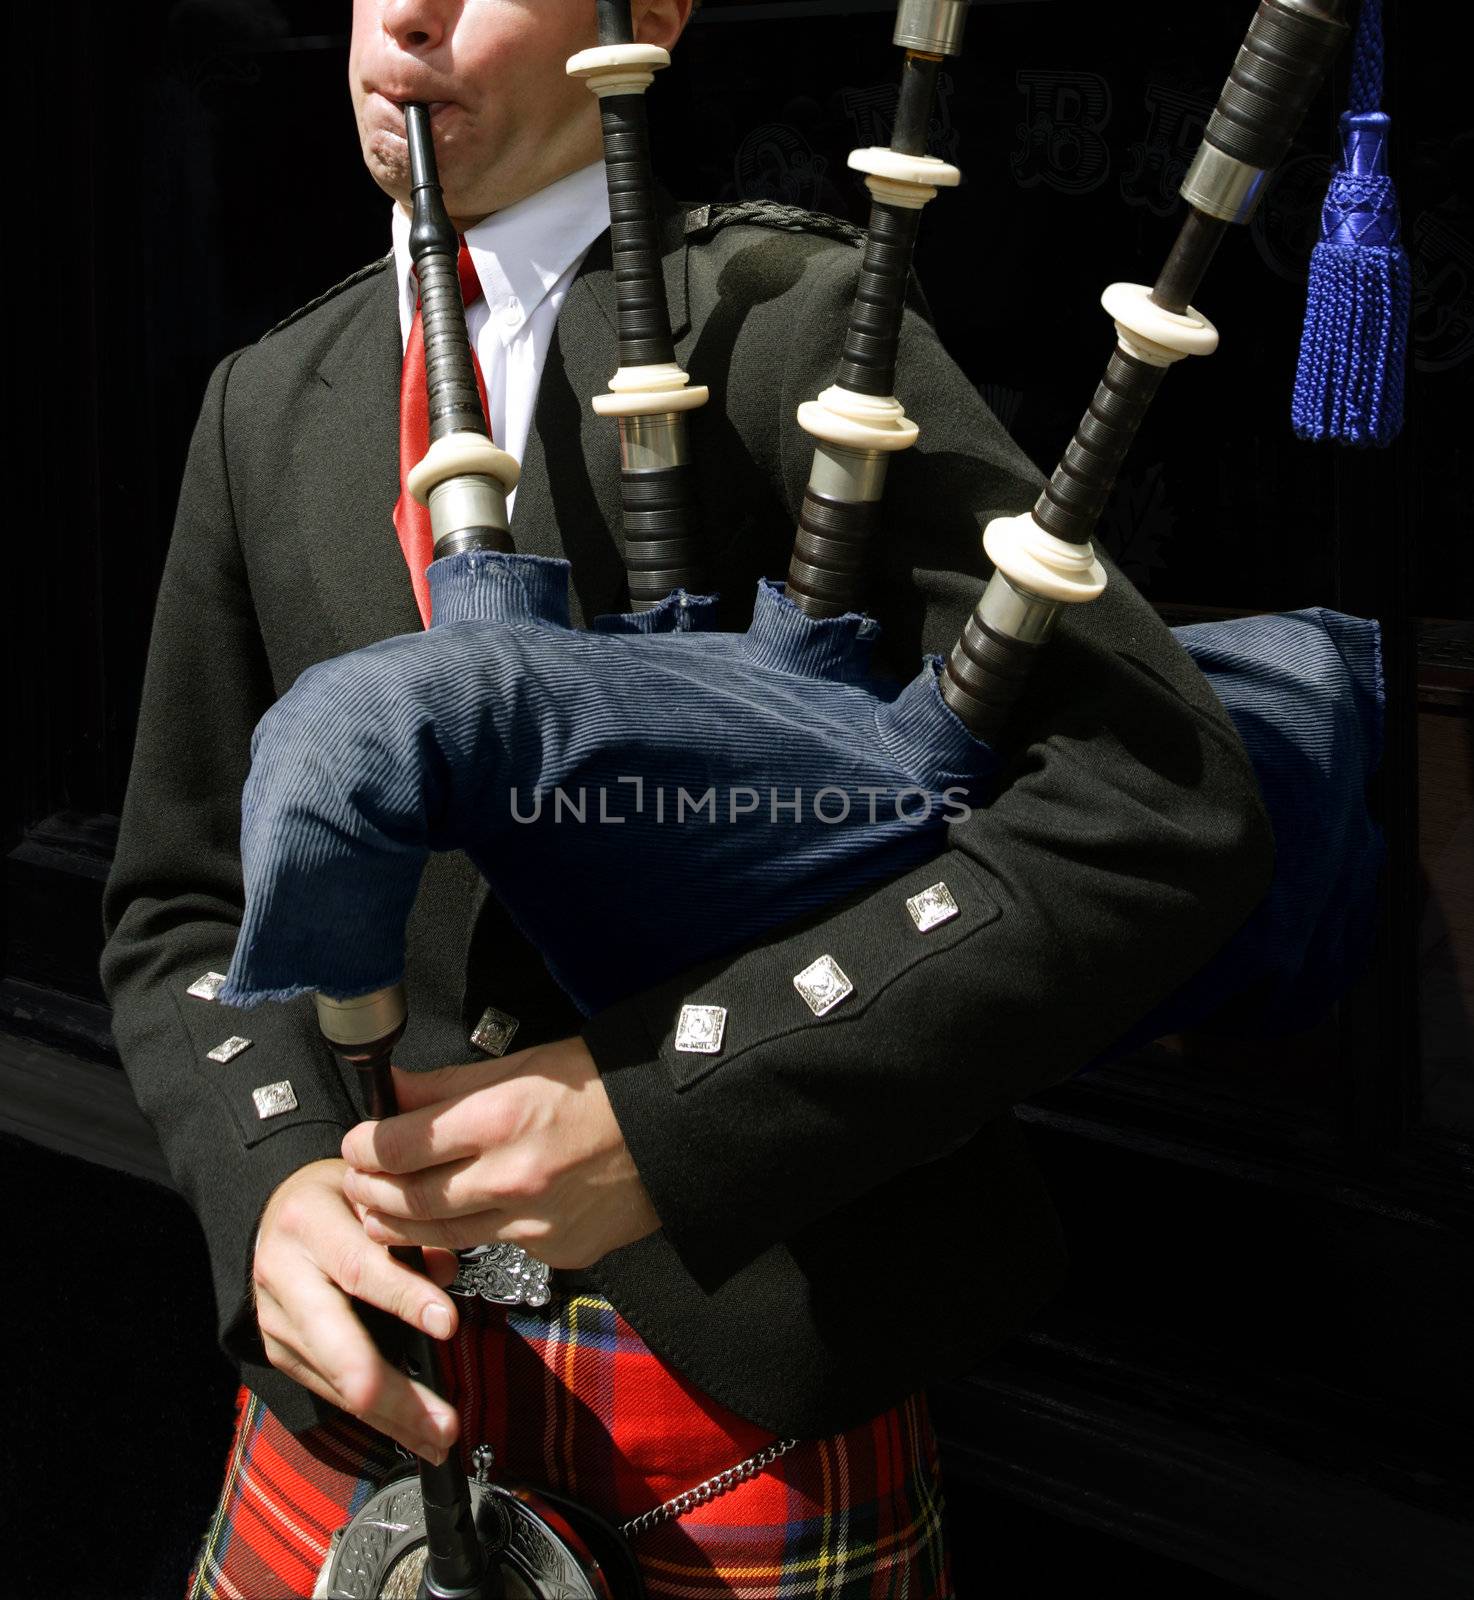 Drumsticks resting on a snare drum between sets of a live show.Bagpiper blowing his pipes in Edinburgh, Scotland.
